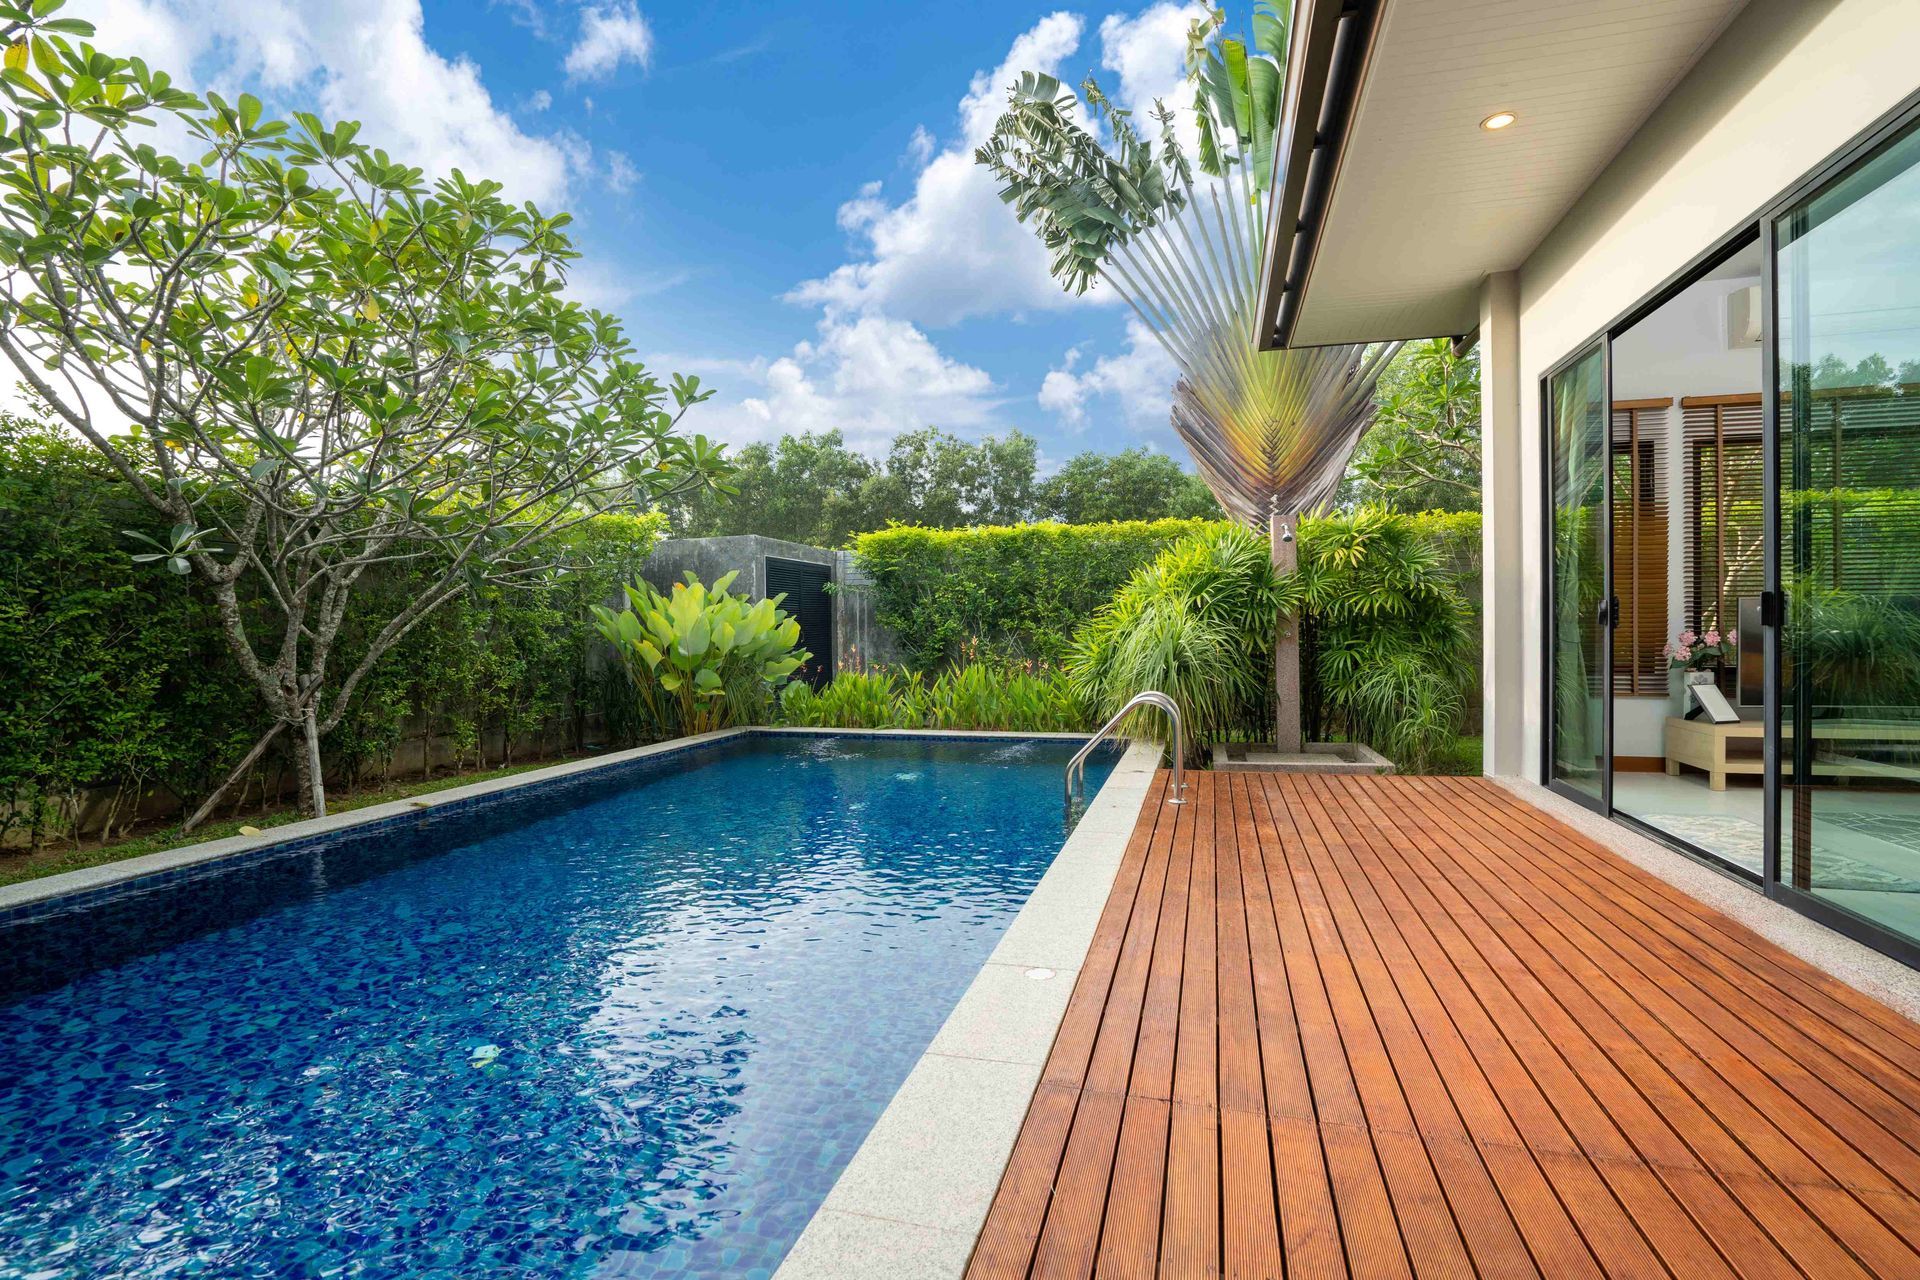 A beautiful in-ground pool with a wooden deck by a house